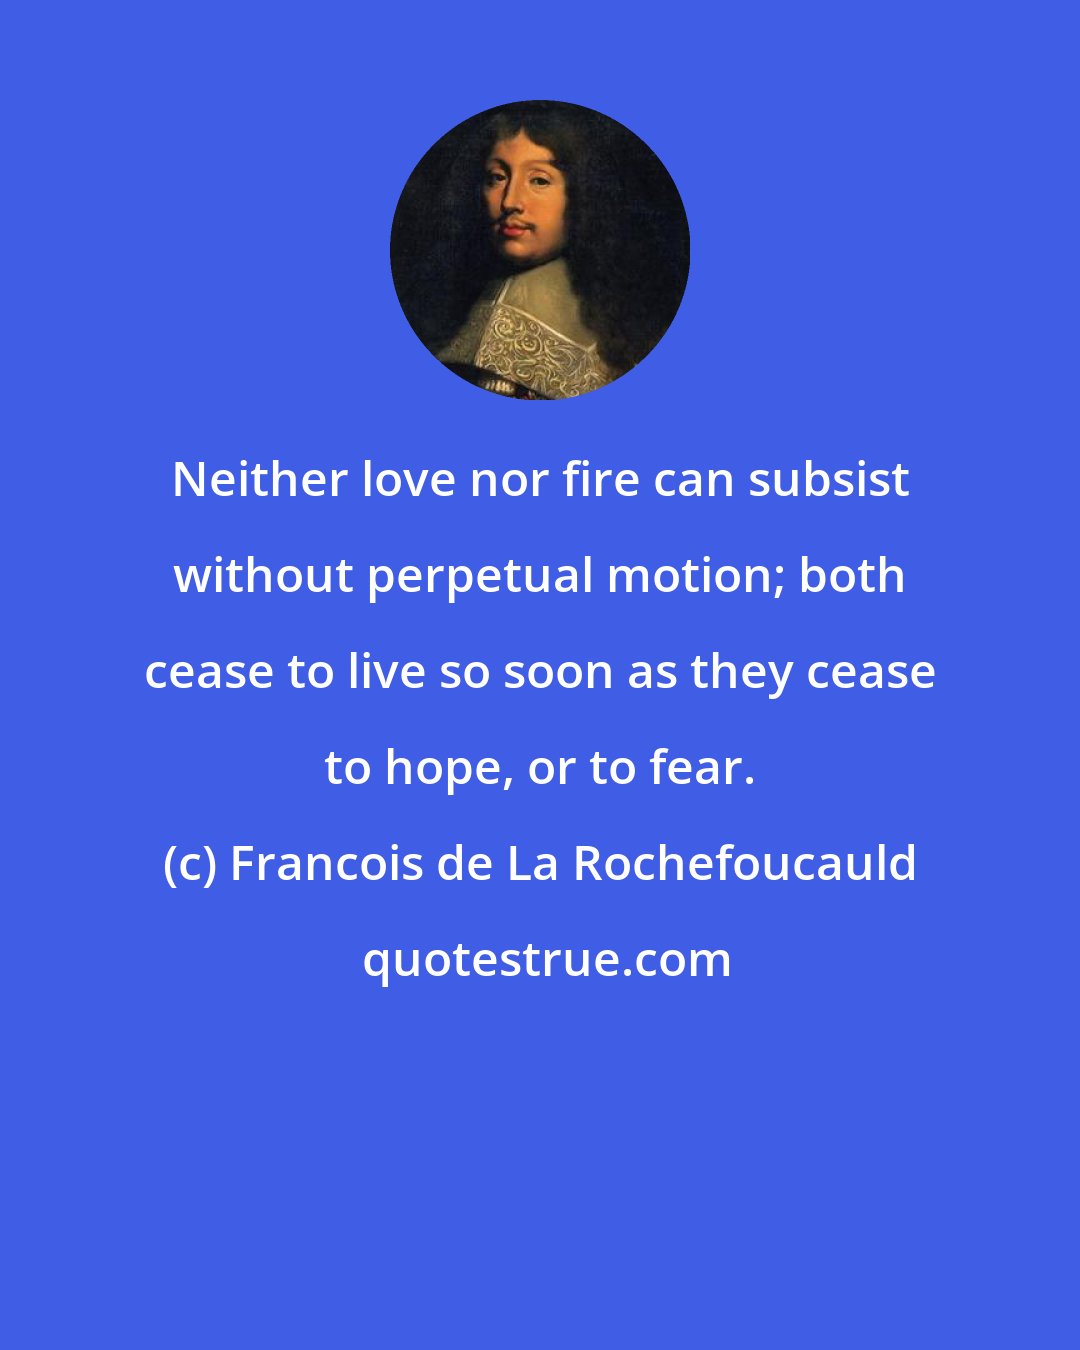 Francois de La Rochefoucauld: Neither love nor fire can subsist without perpetual motion; both cease to live so soon as they cease to hope, or to fear.